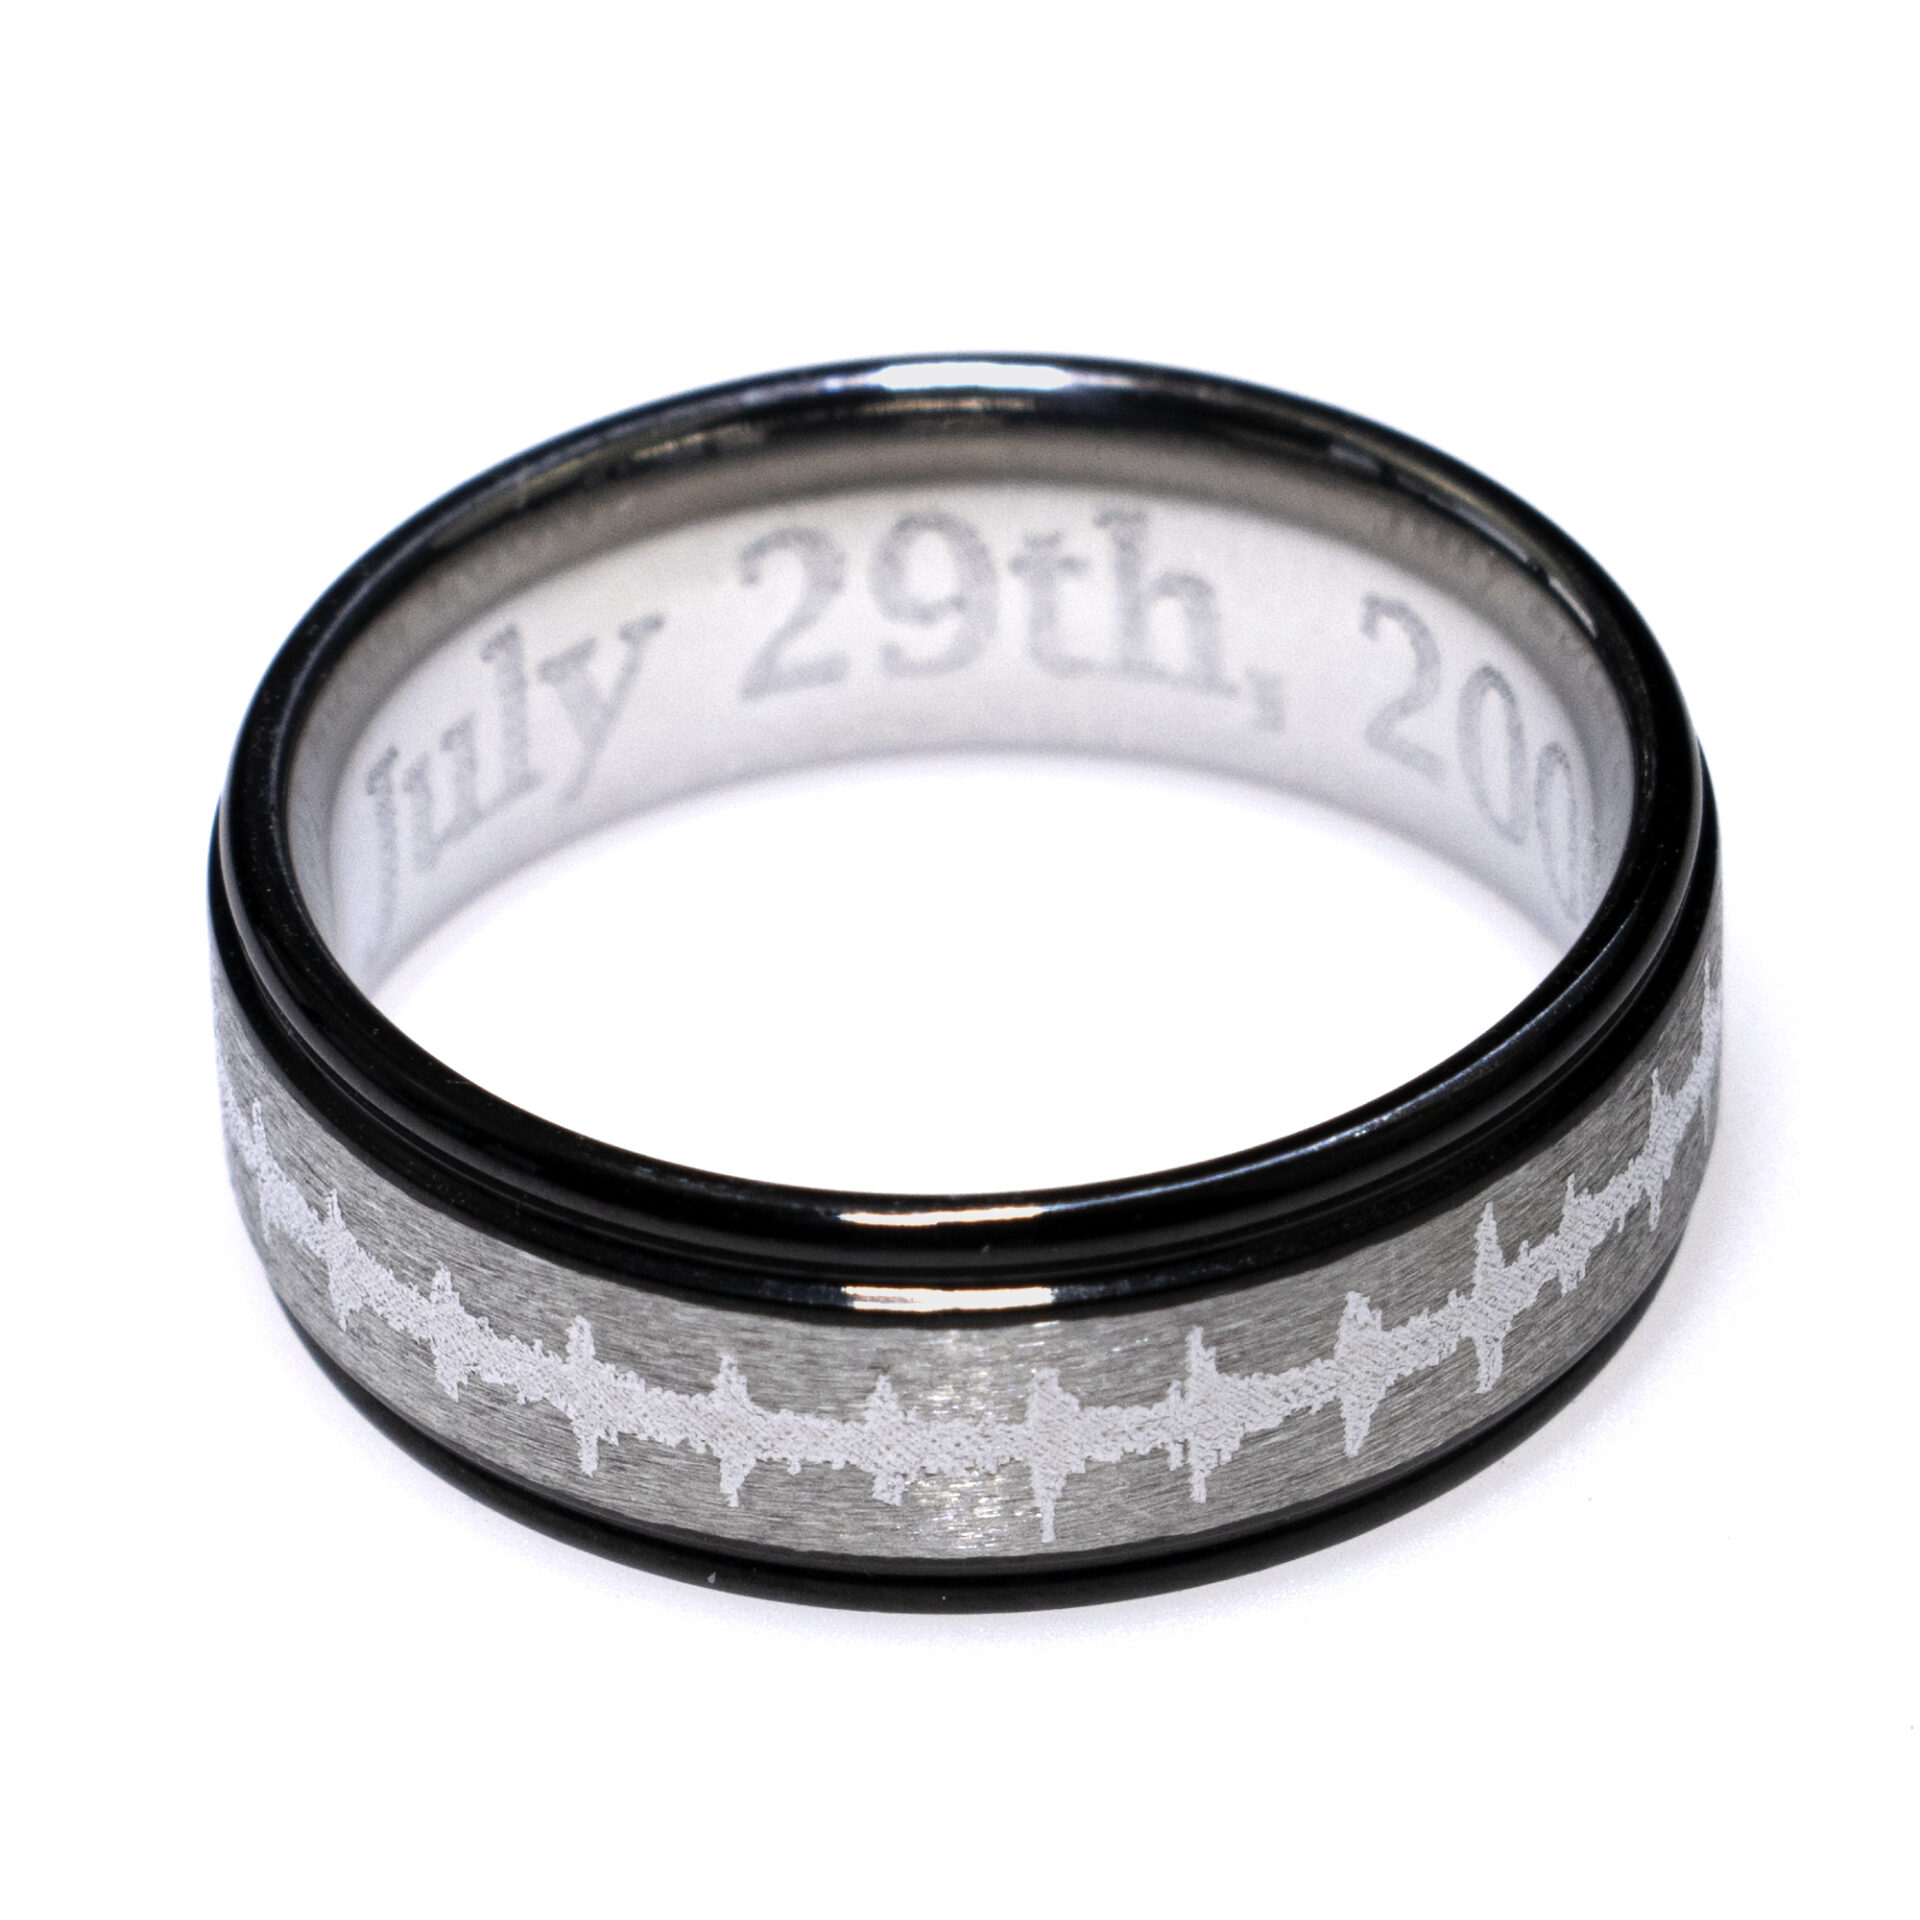 Our personalized stainless steel band for men makes the perfect ring for daddy. Engraved with text or your baby's actual heartbeat. USA Made, FREE Shipping!